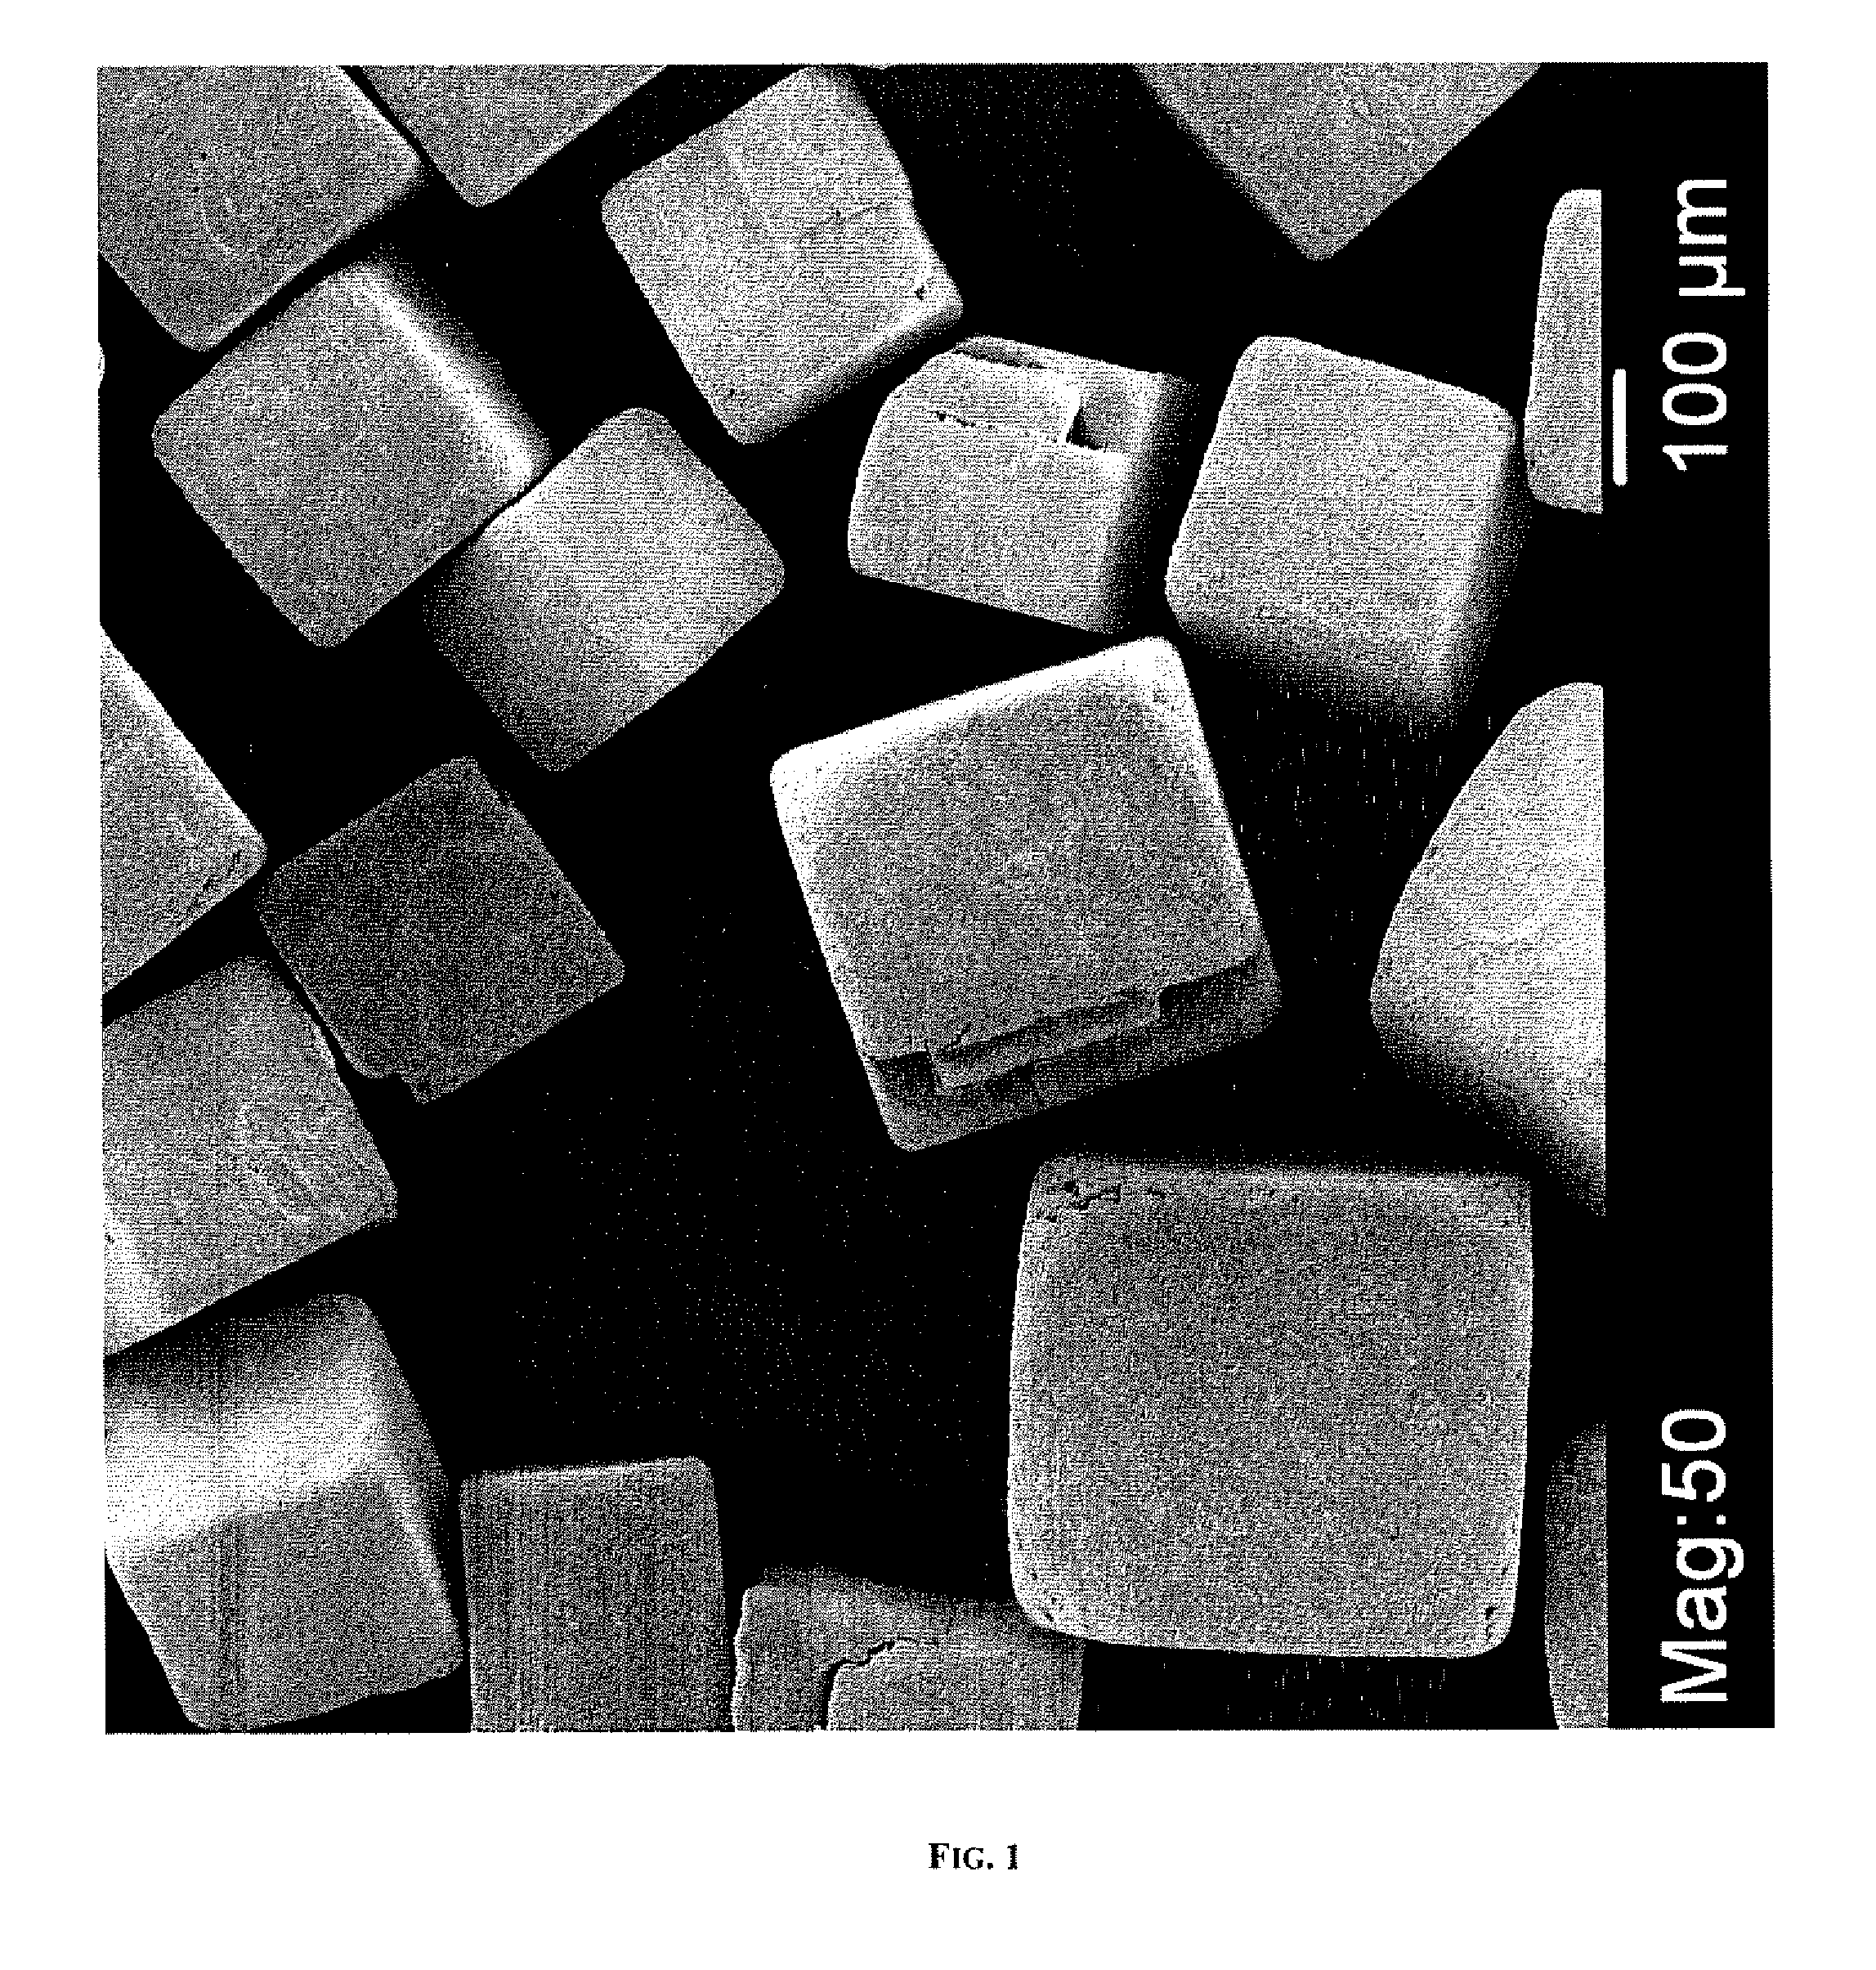 Method for Producing a Low Sodium Salt Composition